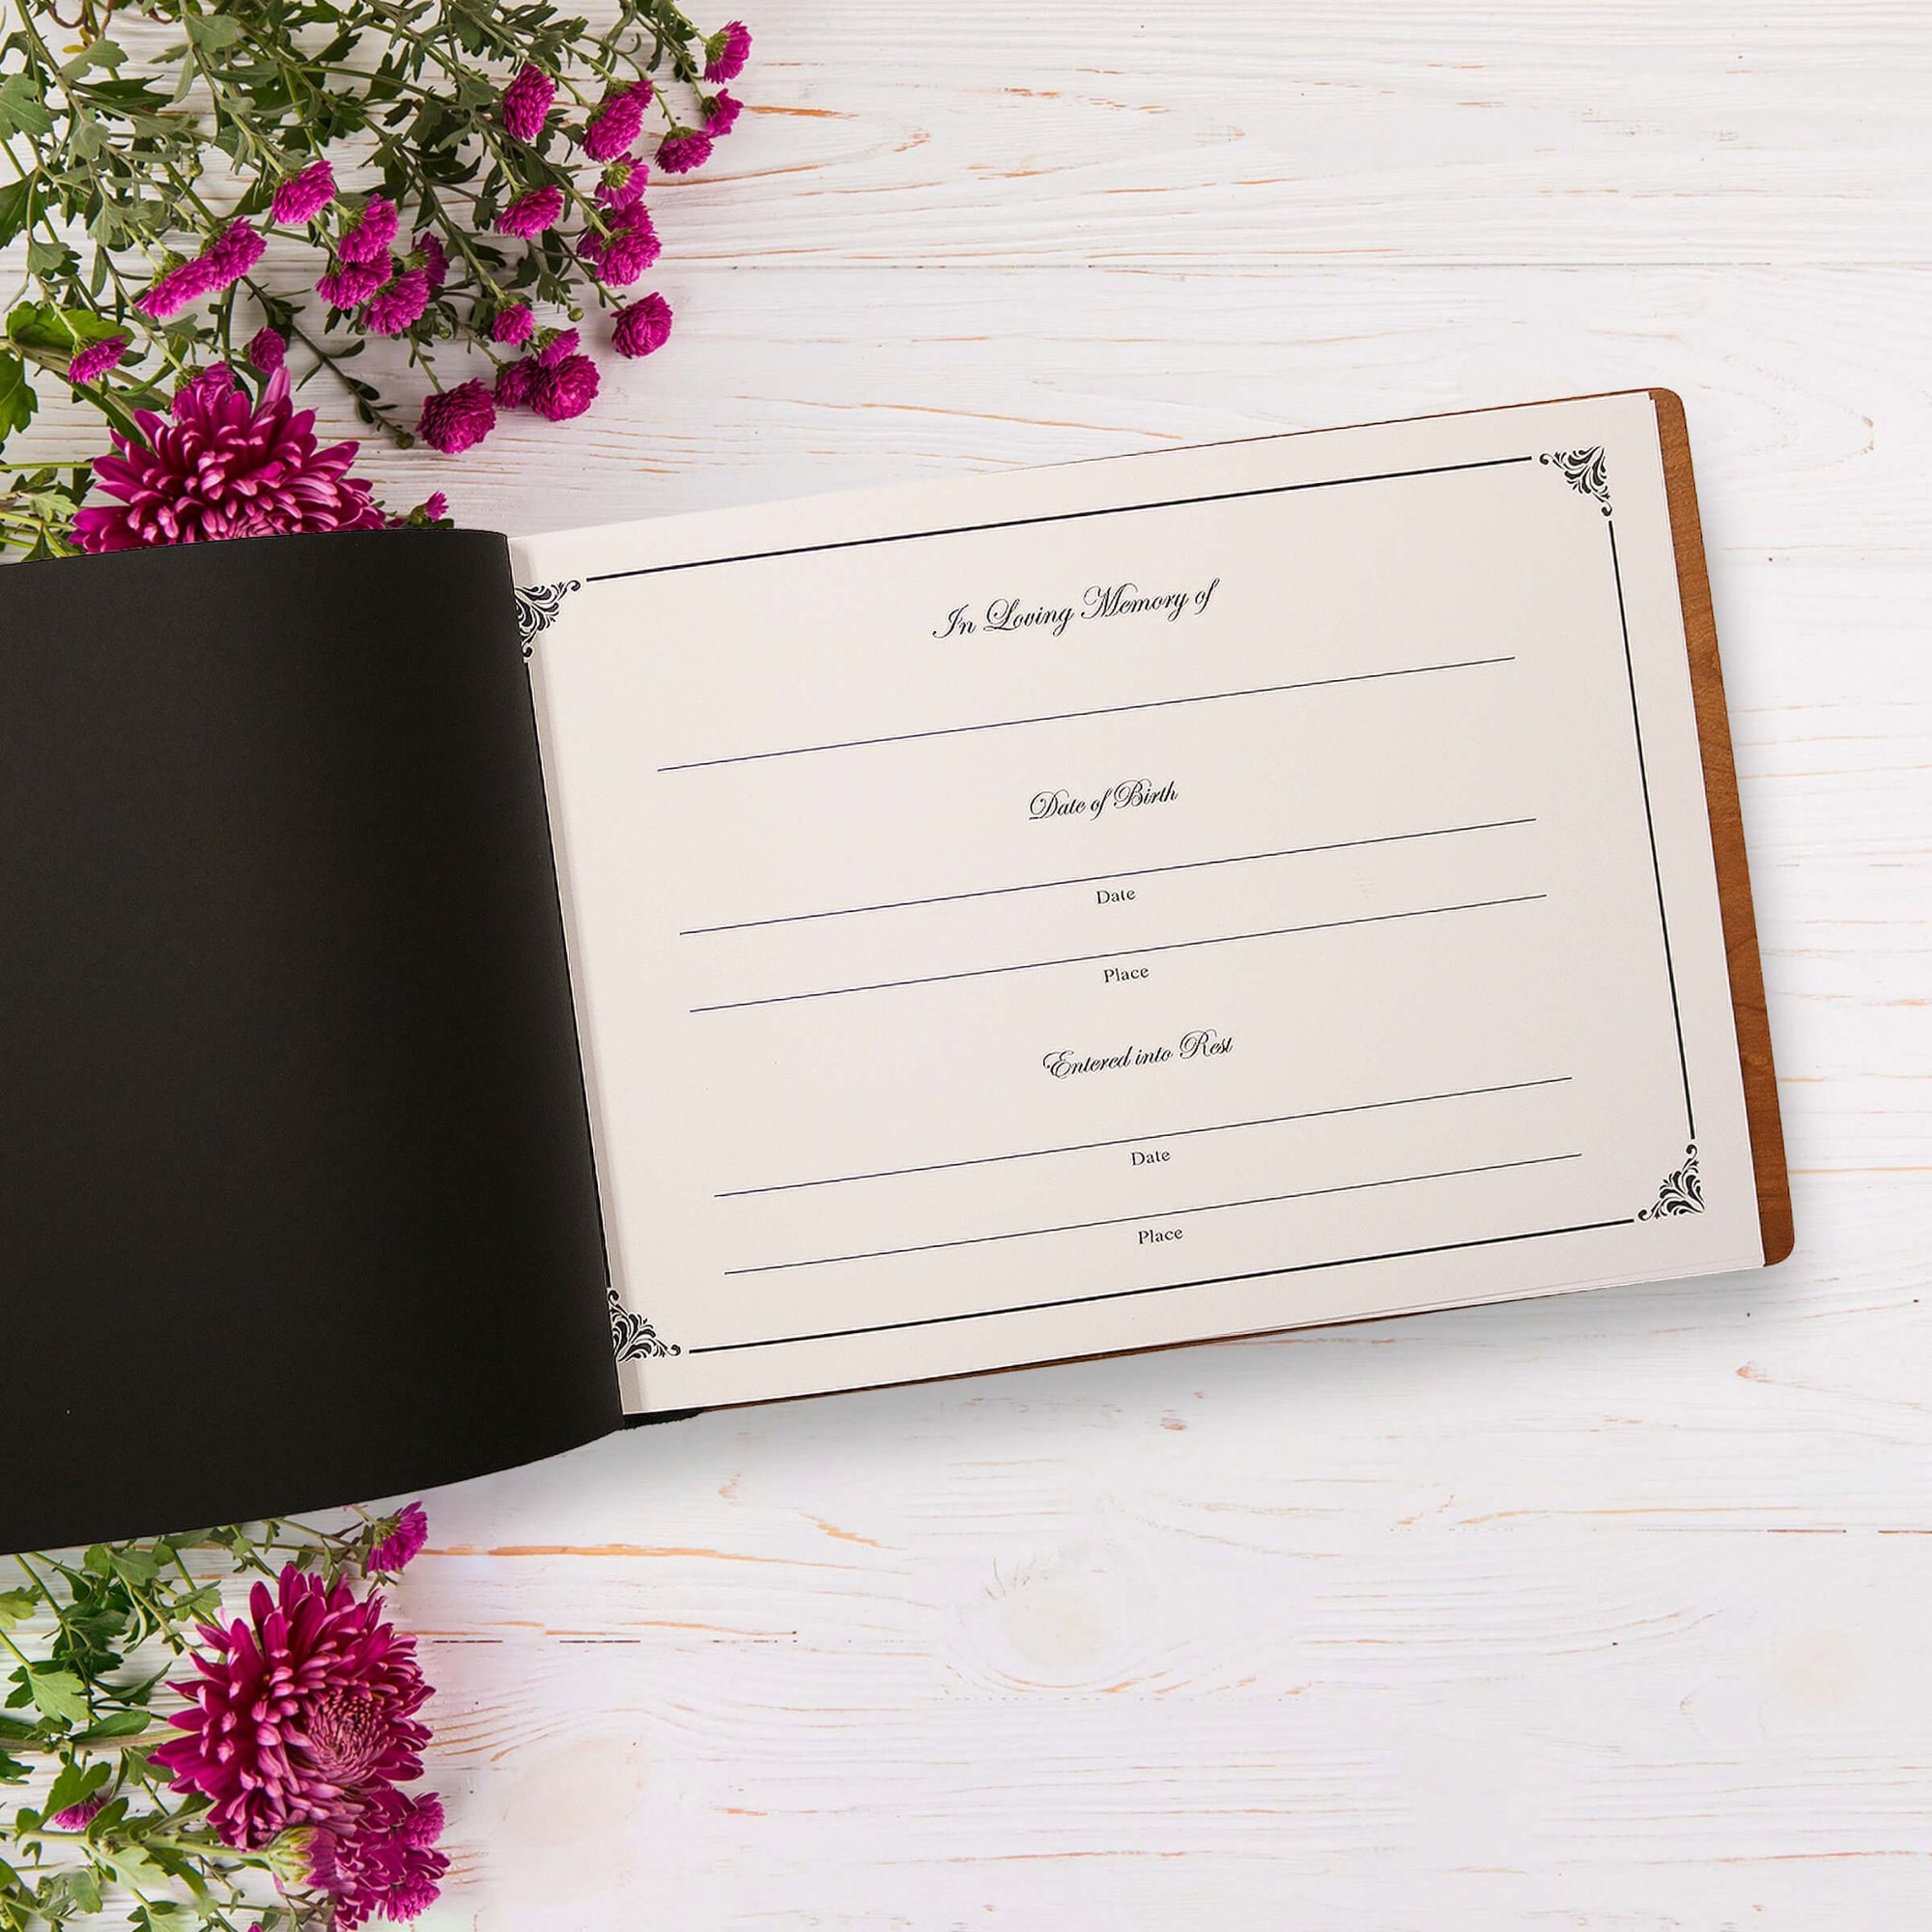 Personalized Funeral Wooden Guestbook for Memorial Service - I Thought of You Today - LifeSong Milestones